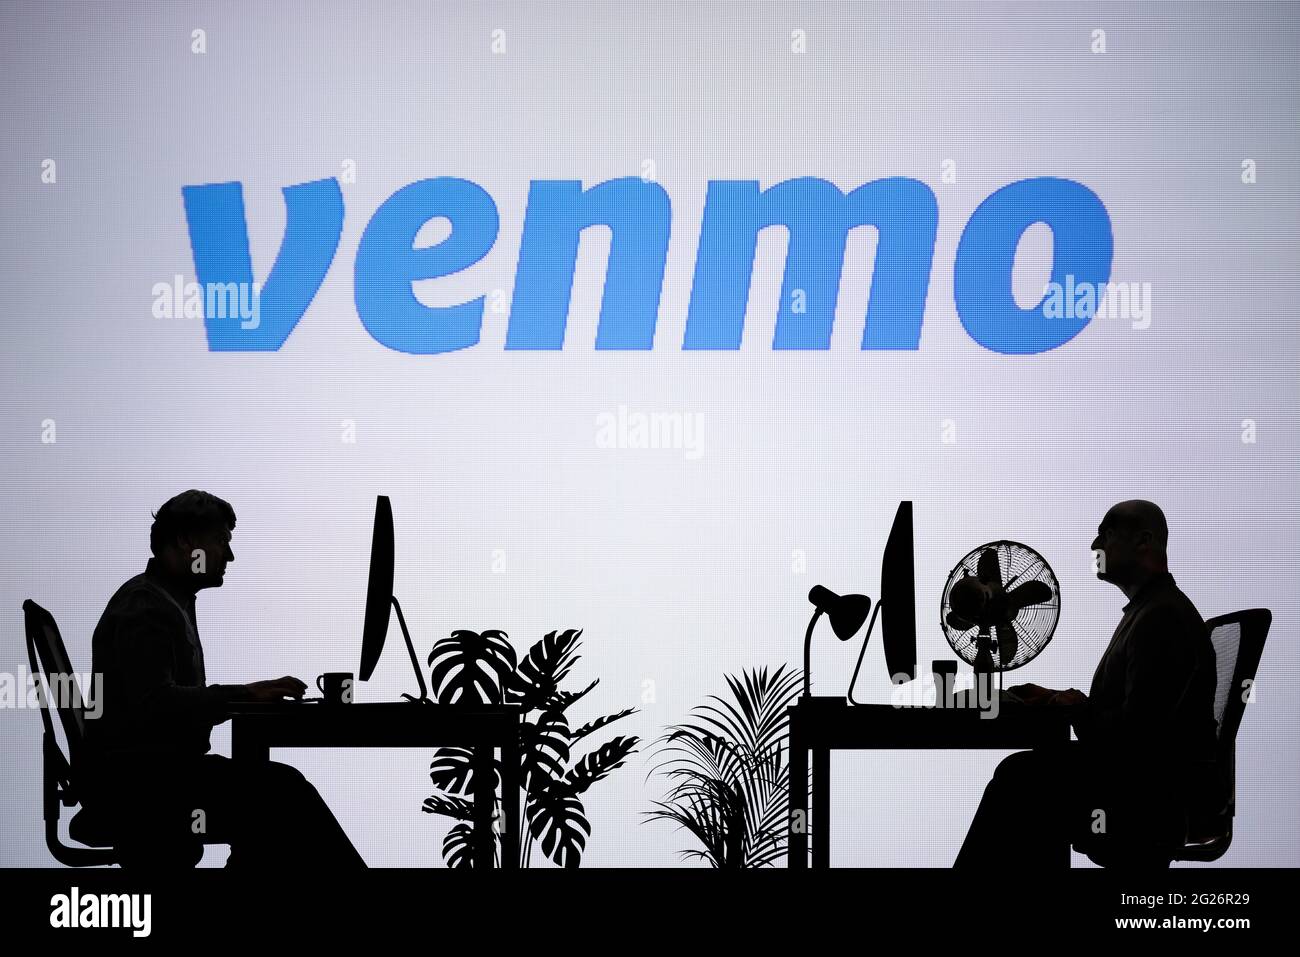 The Venmo logo is seen on an LED screen in the background while two silhouetted people work in an office environment (Editorial use only) Stock Photo